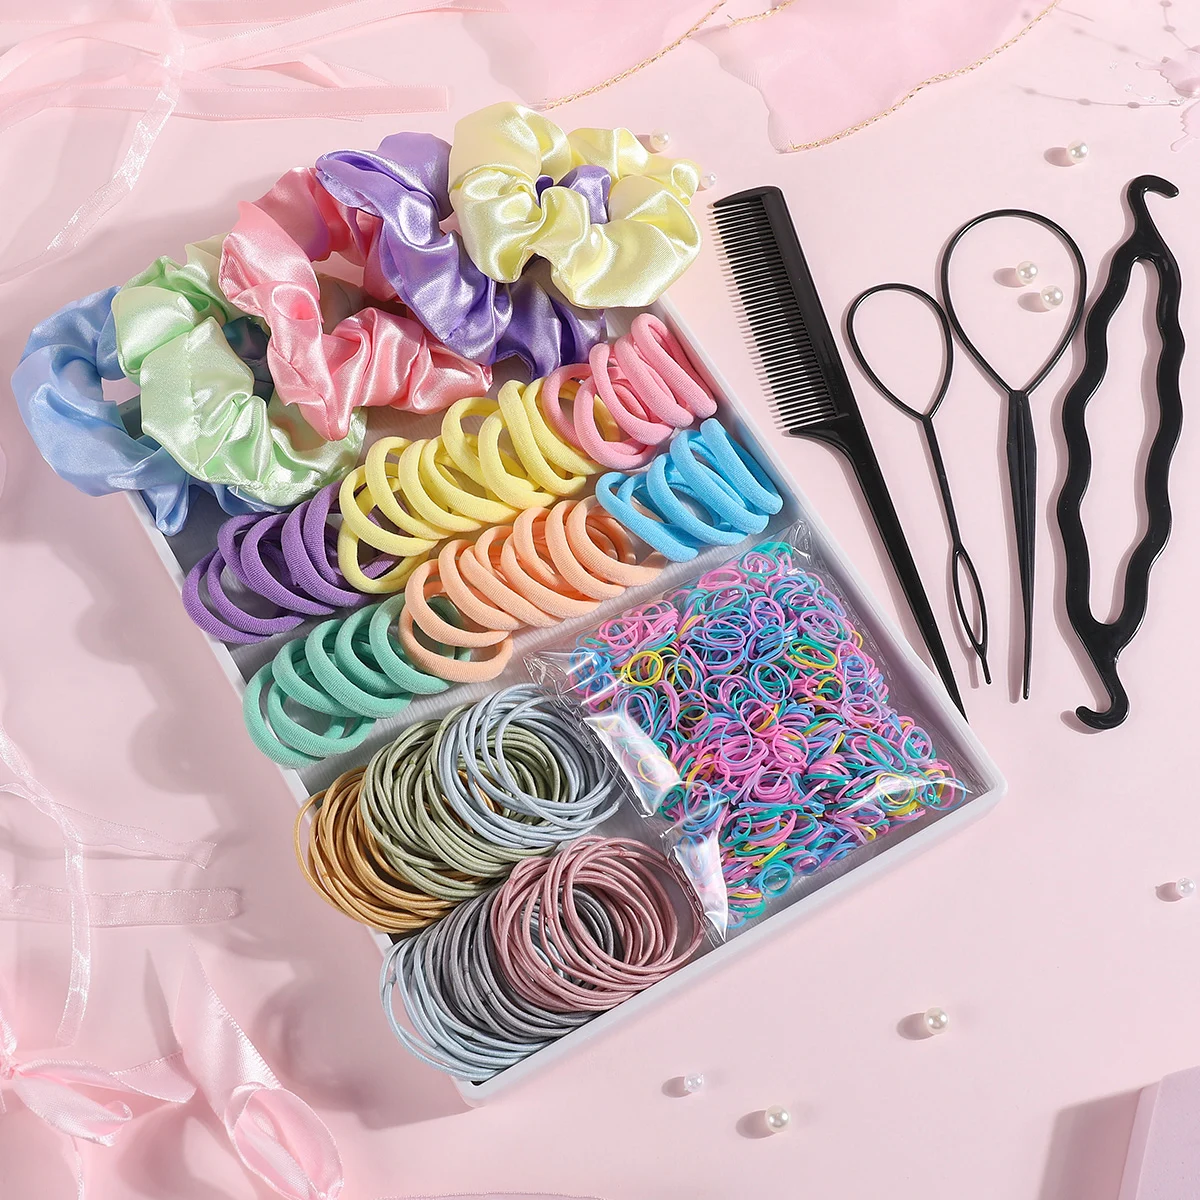 1159Pcs Girls Hair Accessories Sets Satin Scrunchies Candy Color Nylon Hair Ties Children Elastic Rubber Bands Ponytail Holder